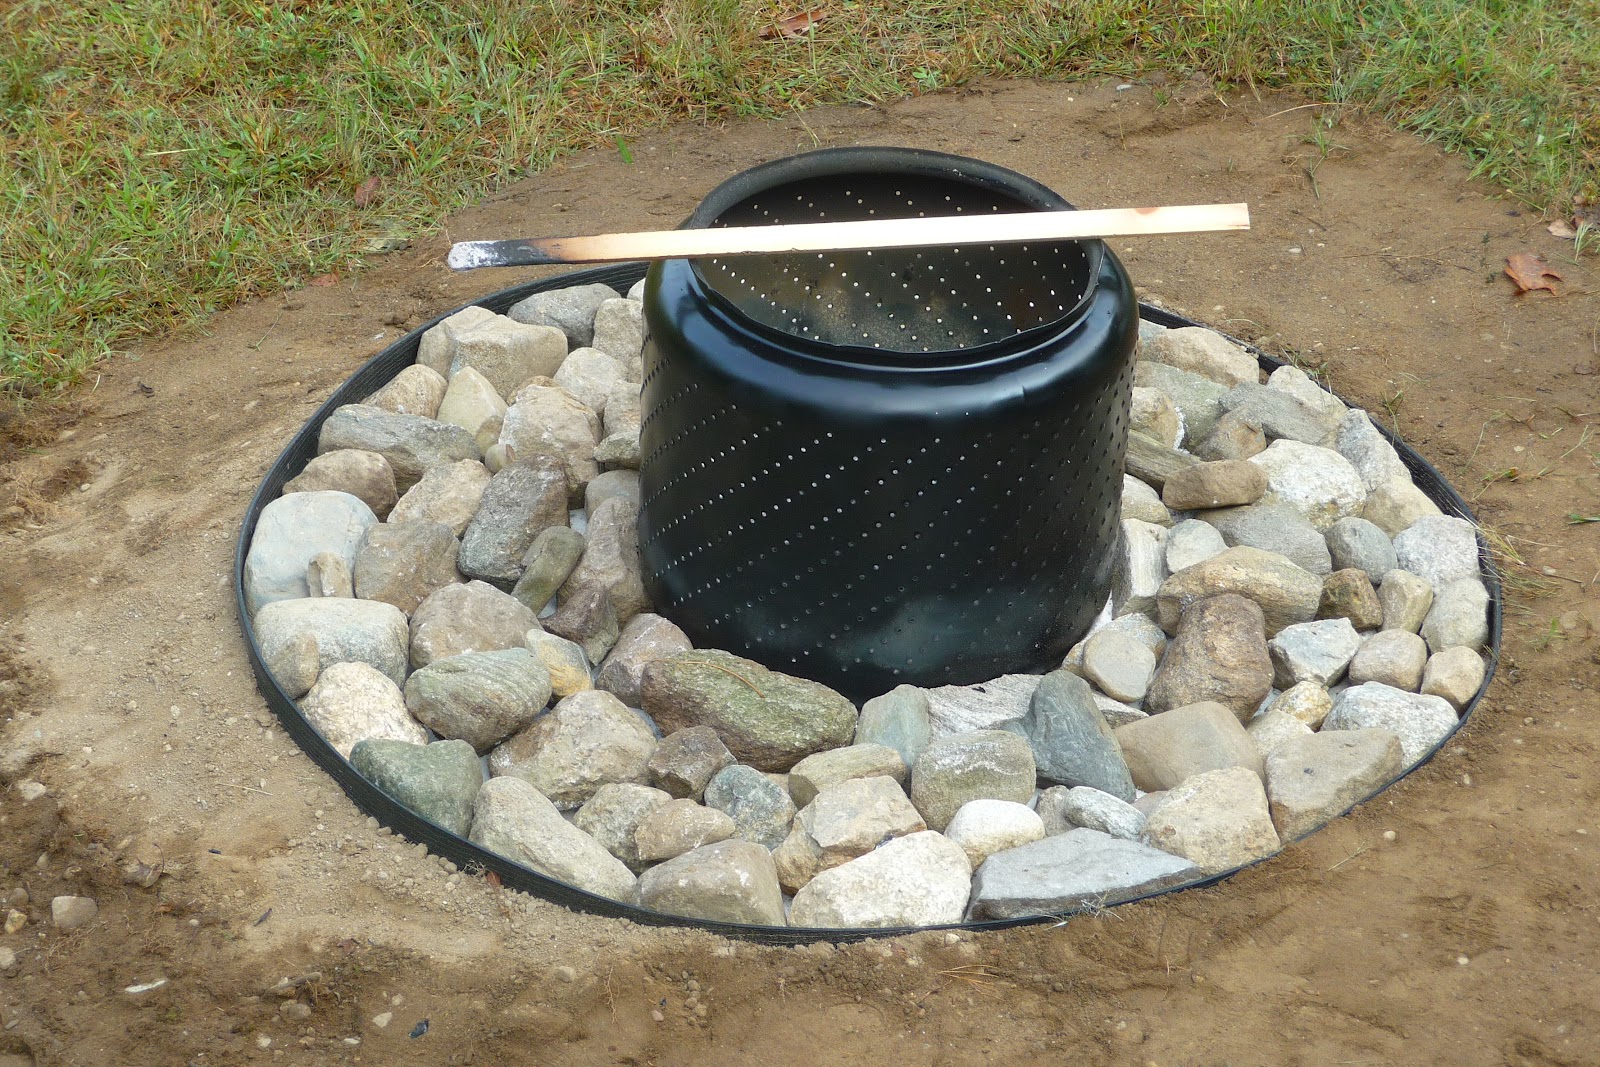 Diy Fire Pit For As Little 0, Steel Utility Tub For Fire Pit